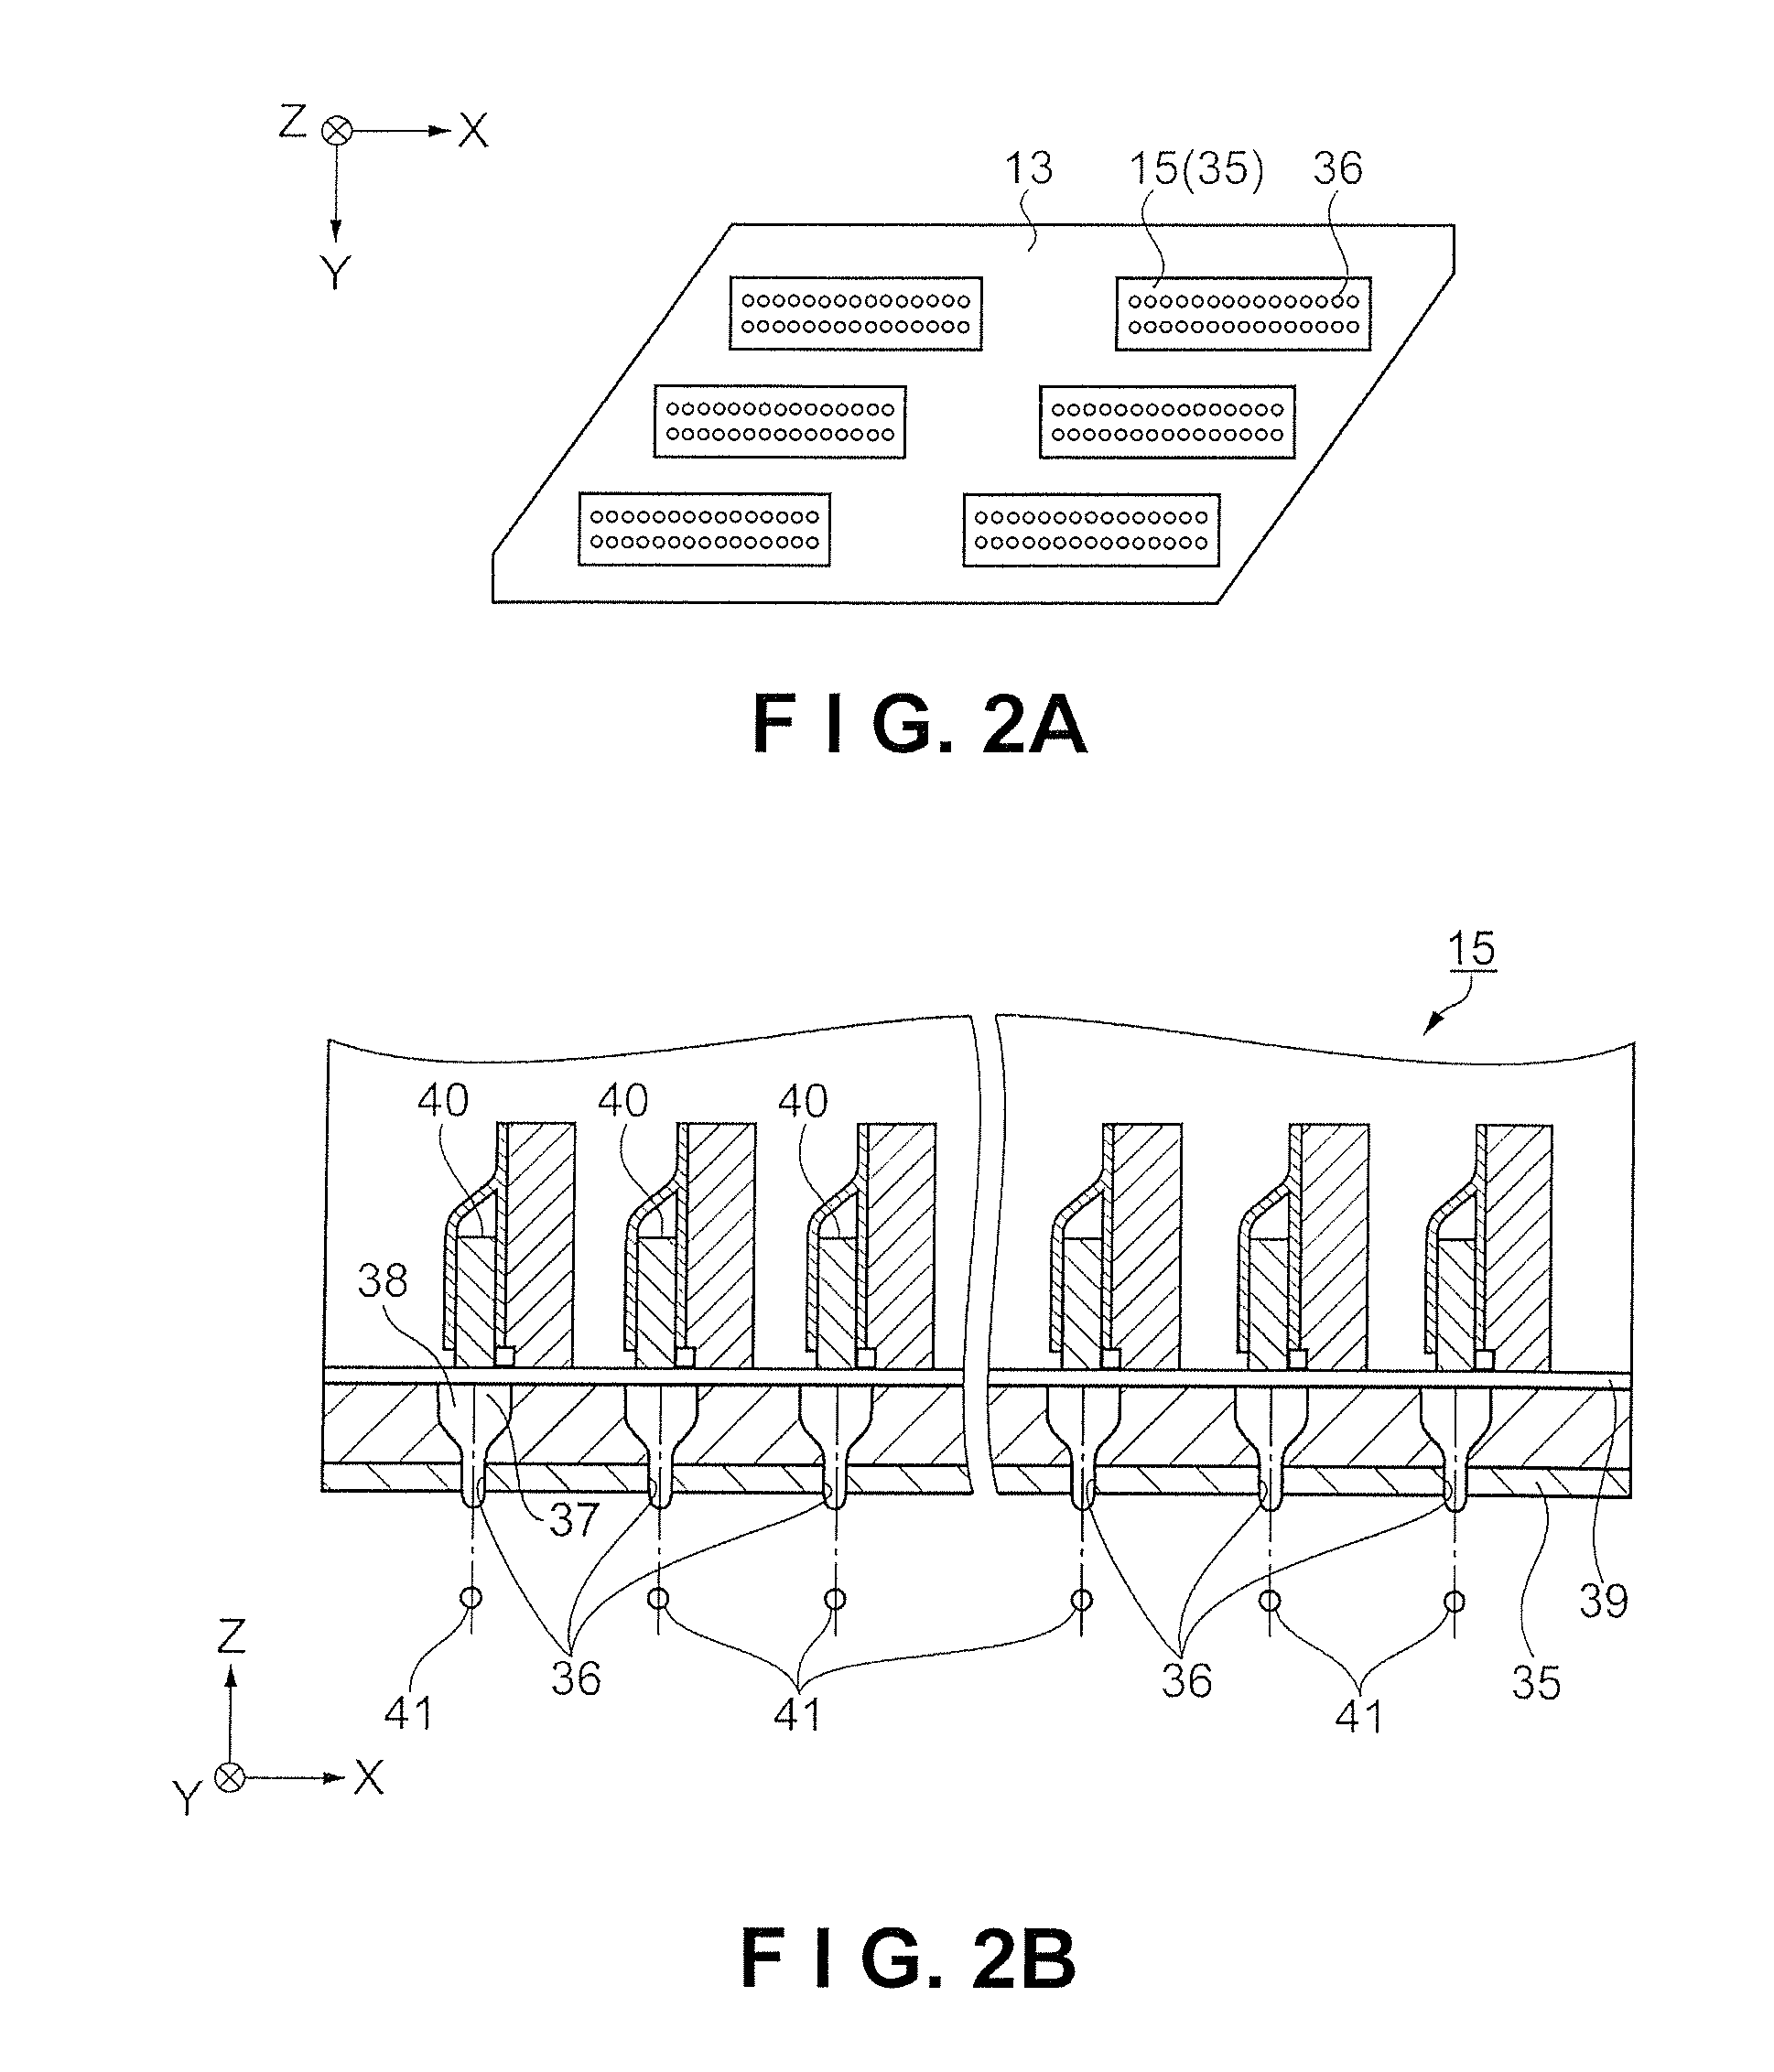 Droplet discharge device